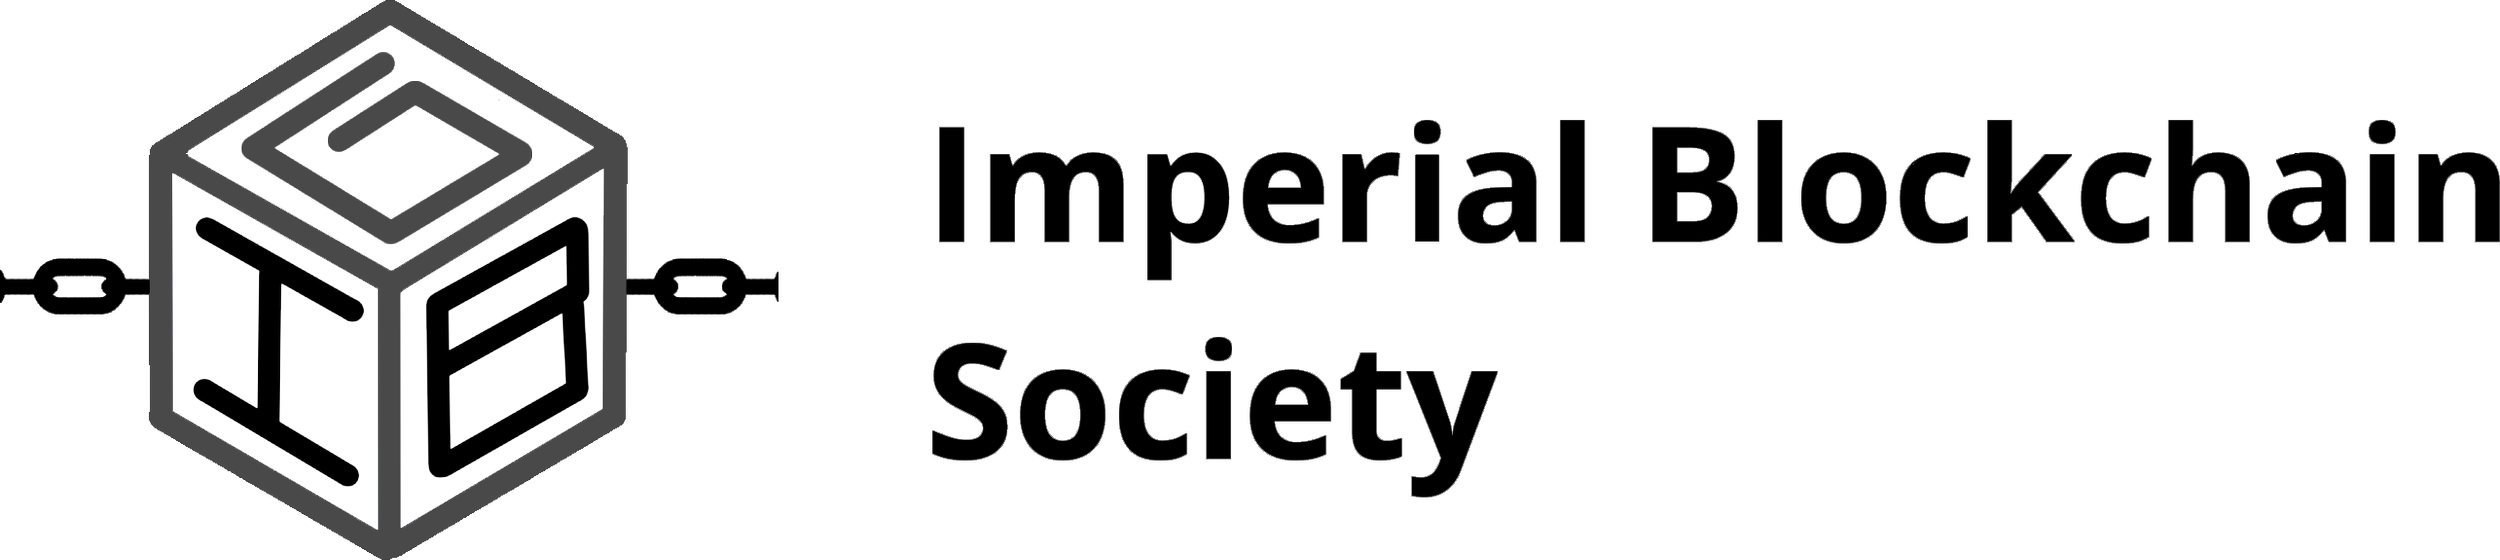 imperial blockchain logo.png